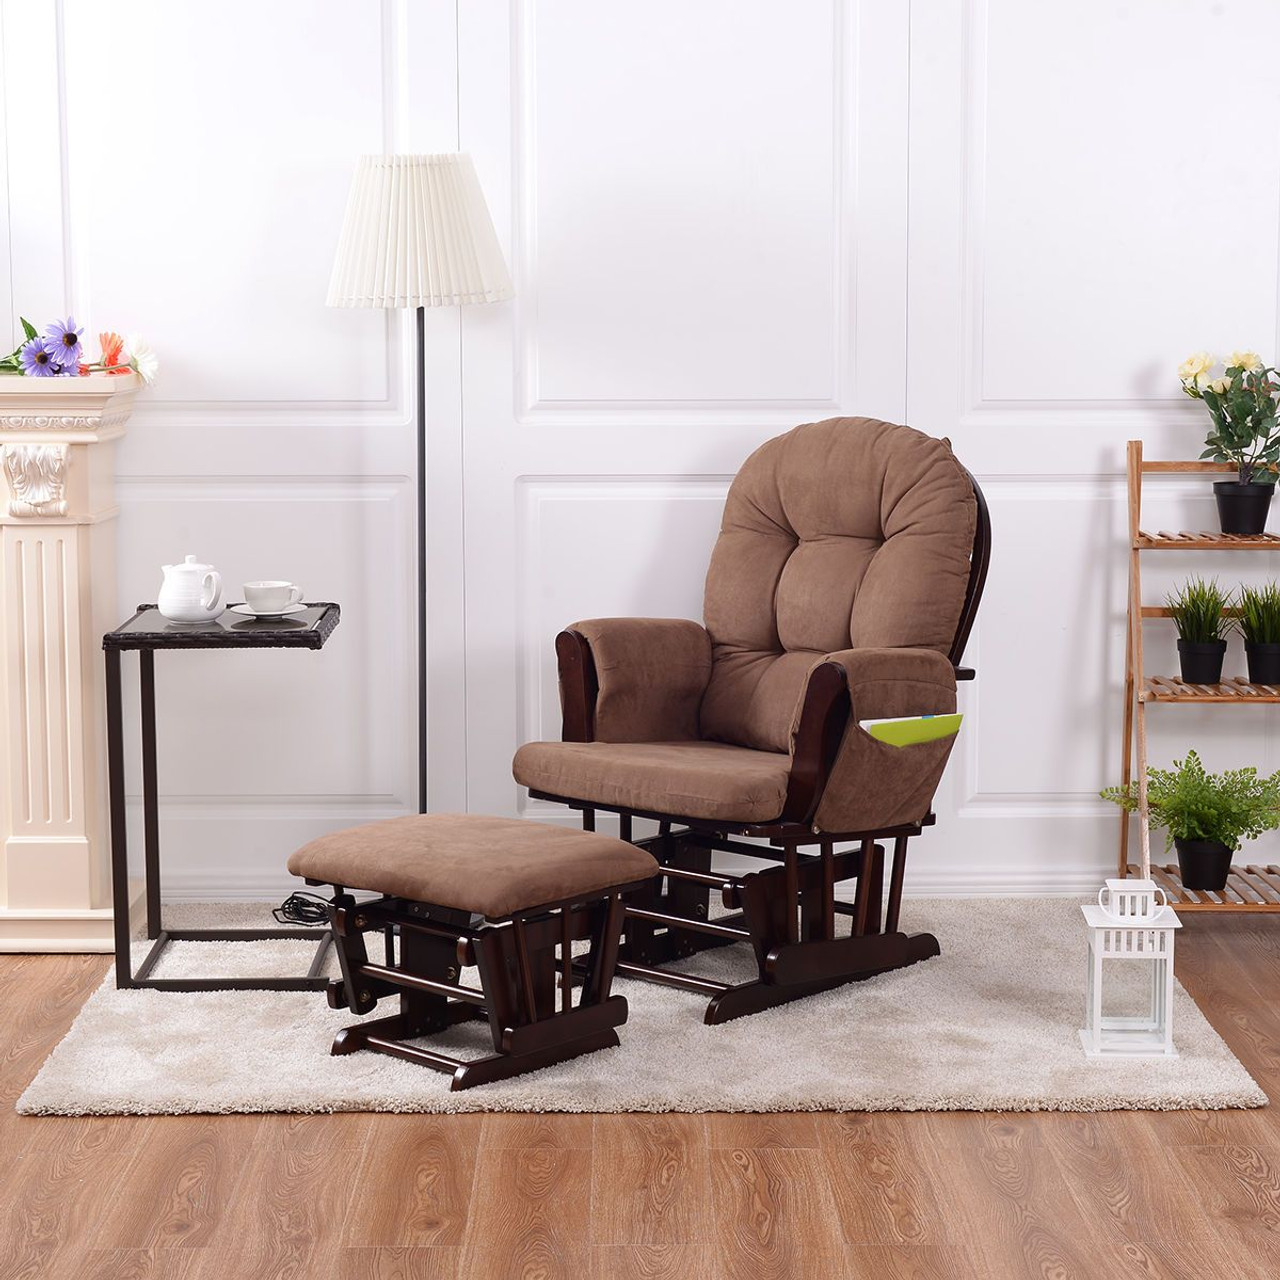 Featured image of post Nursery Rocking Chair And Ottoman - Rockers typically have a more intense rocking motion and match most nursery themes.